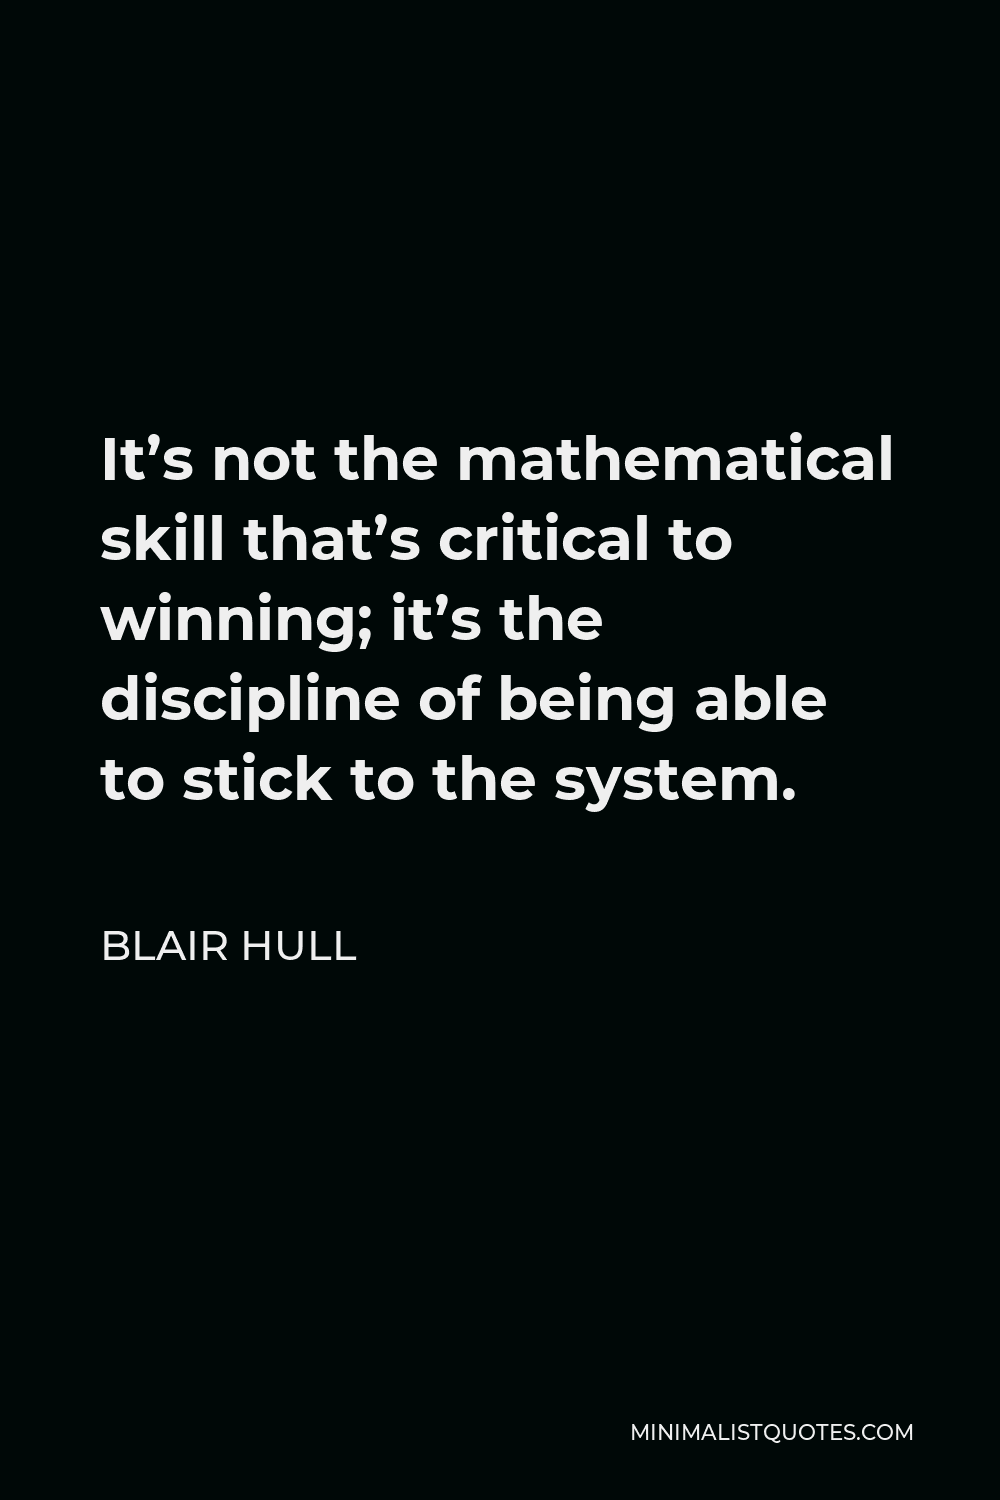 Blair Hull Quote - It’s not the mathematical skill that’s critical to winning; it’s the discipline of being able to stick to the system.